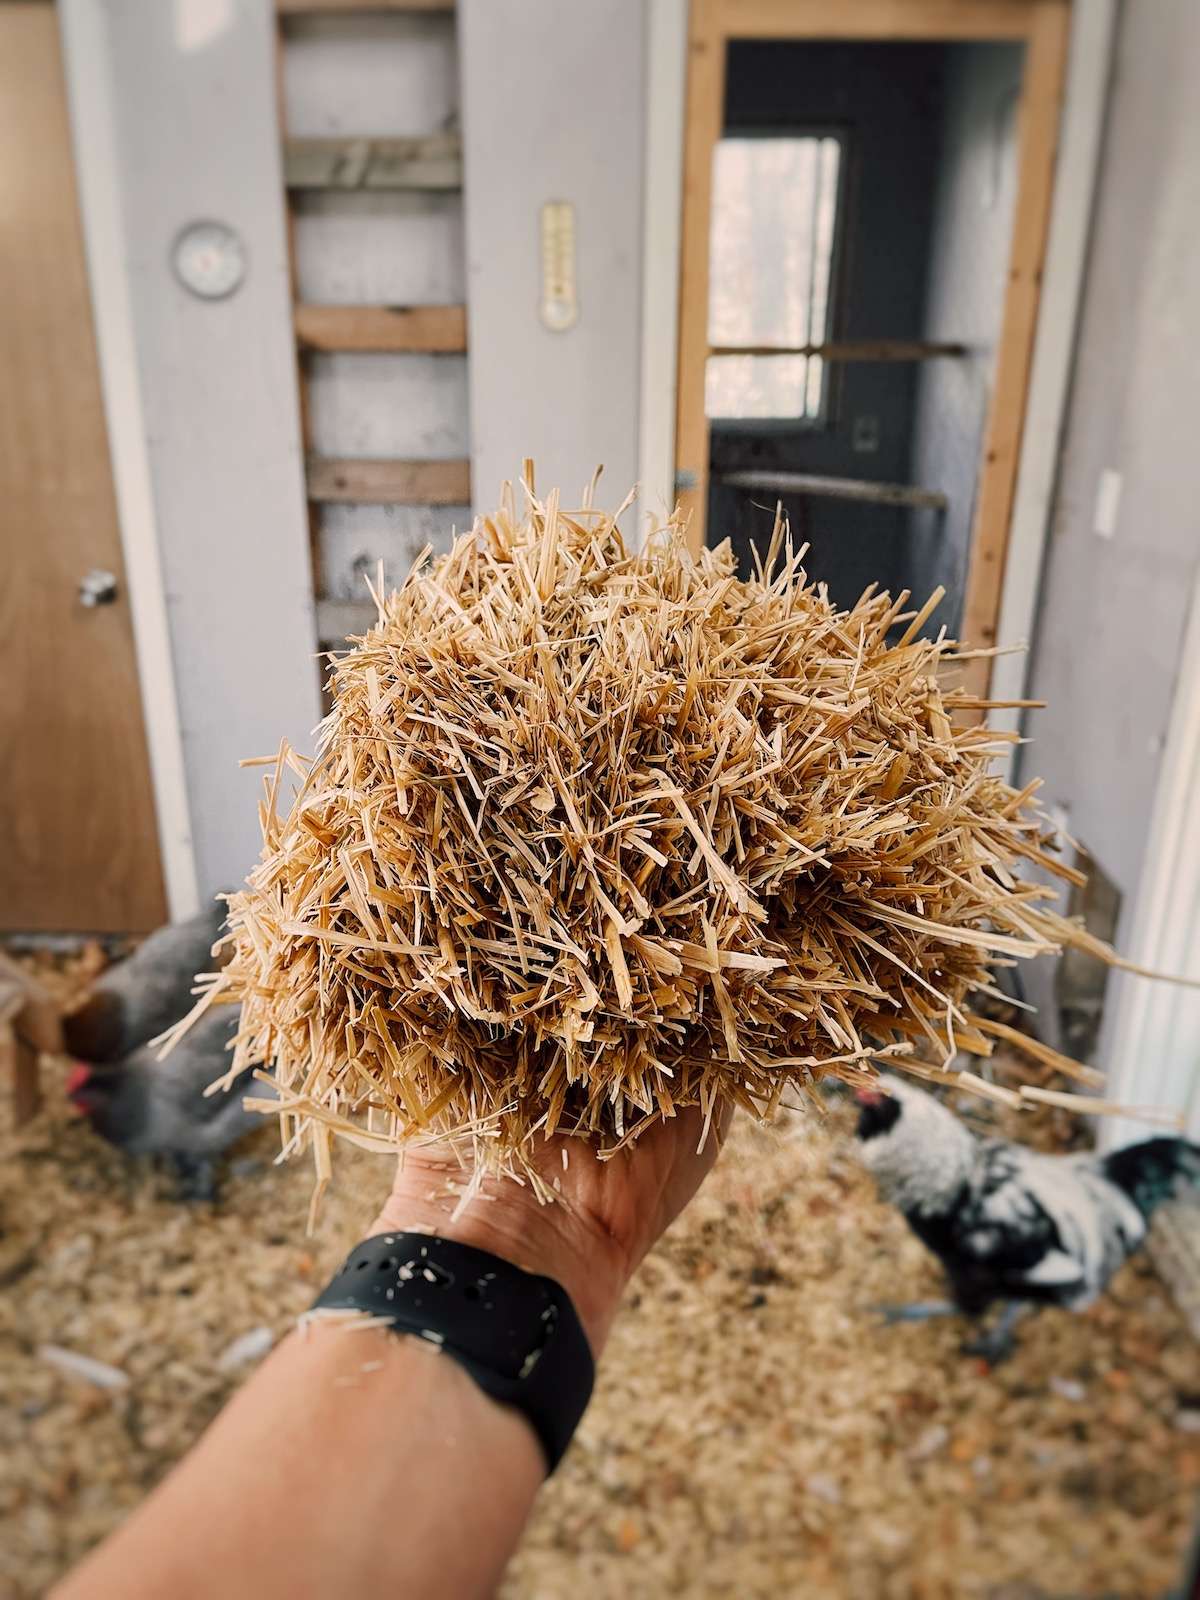 Holding up a large handful of chopped straw inside a chicken coop